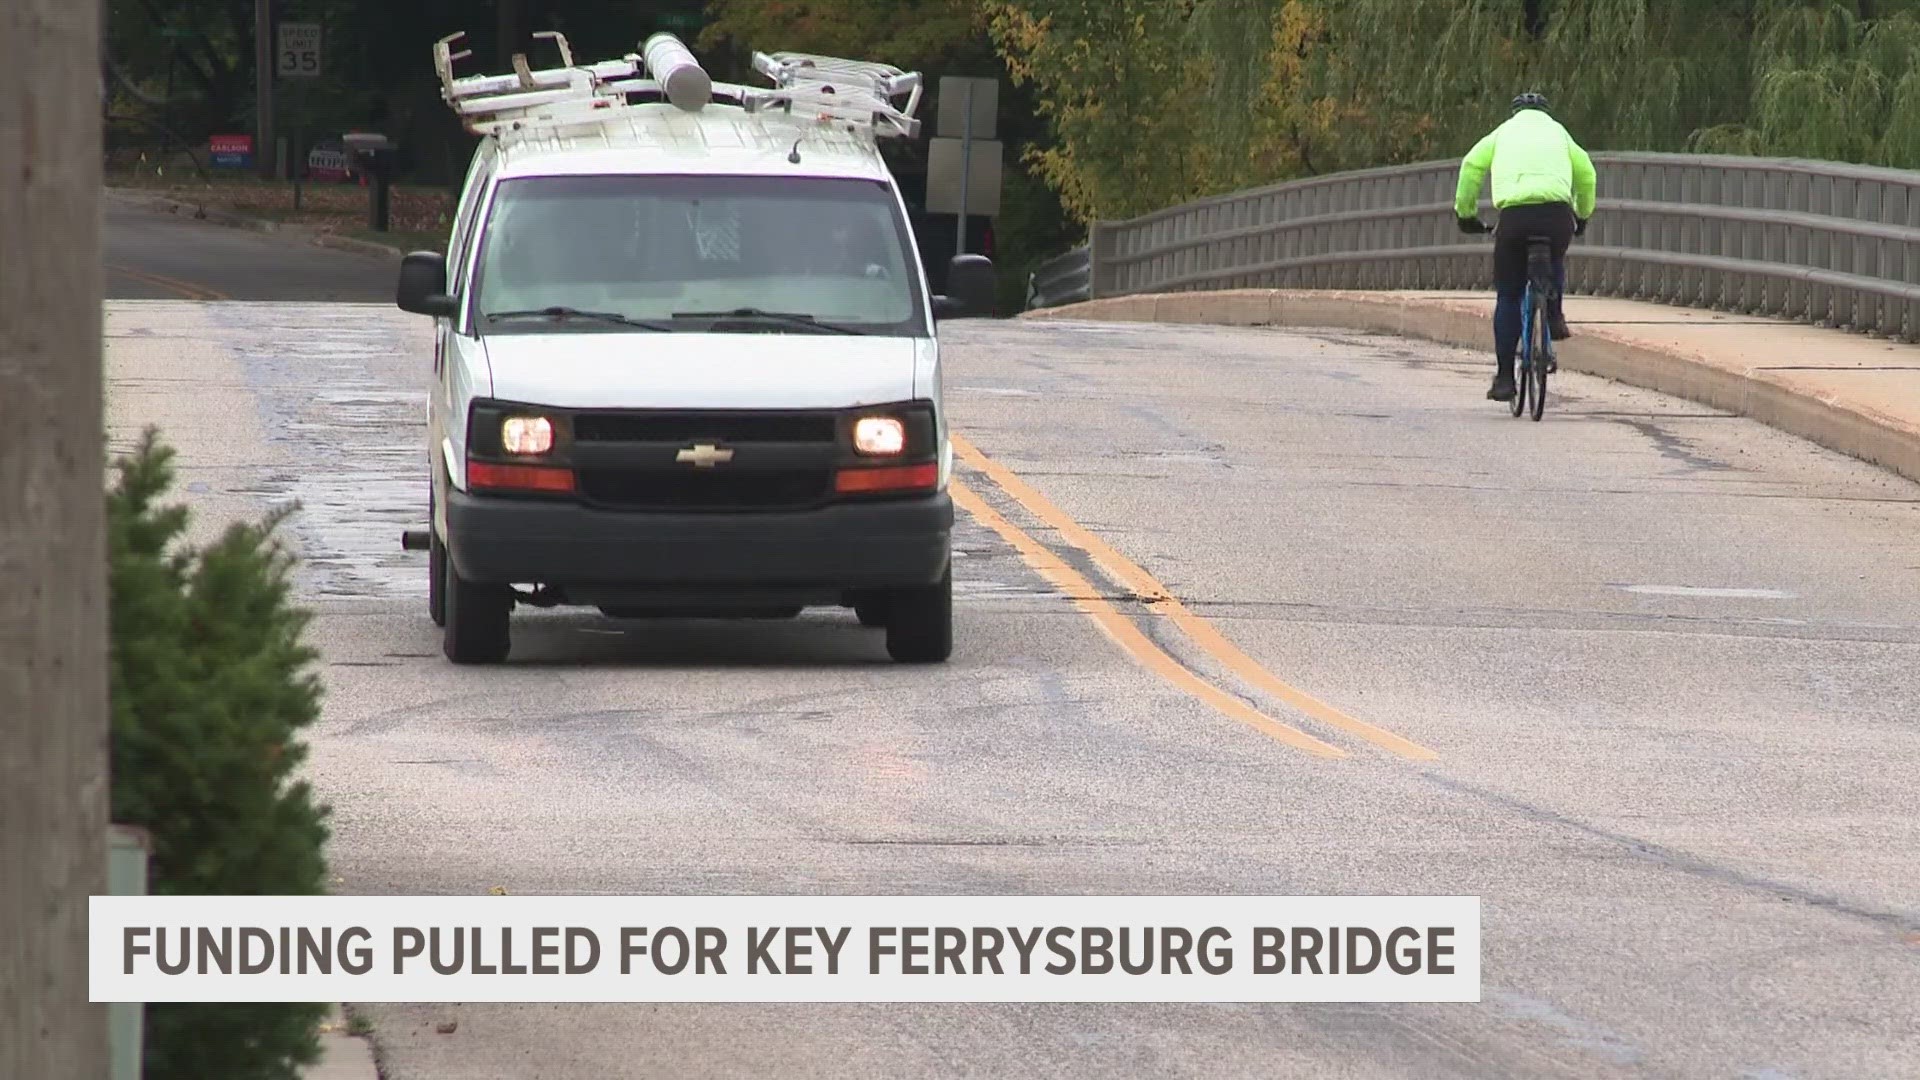 The Smith's Bridge in Ferrysburg may be small, but it's a big deal for those who live in the area - those like Kim Senior.